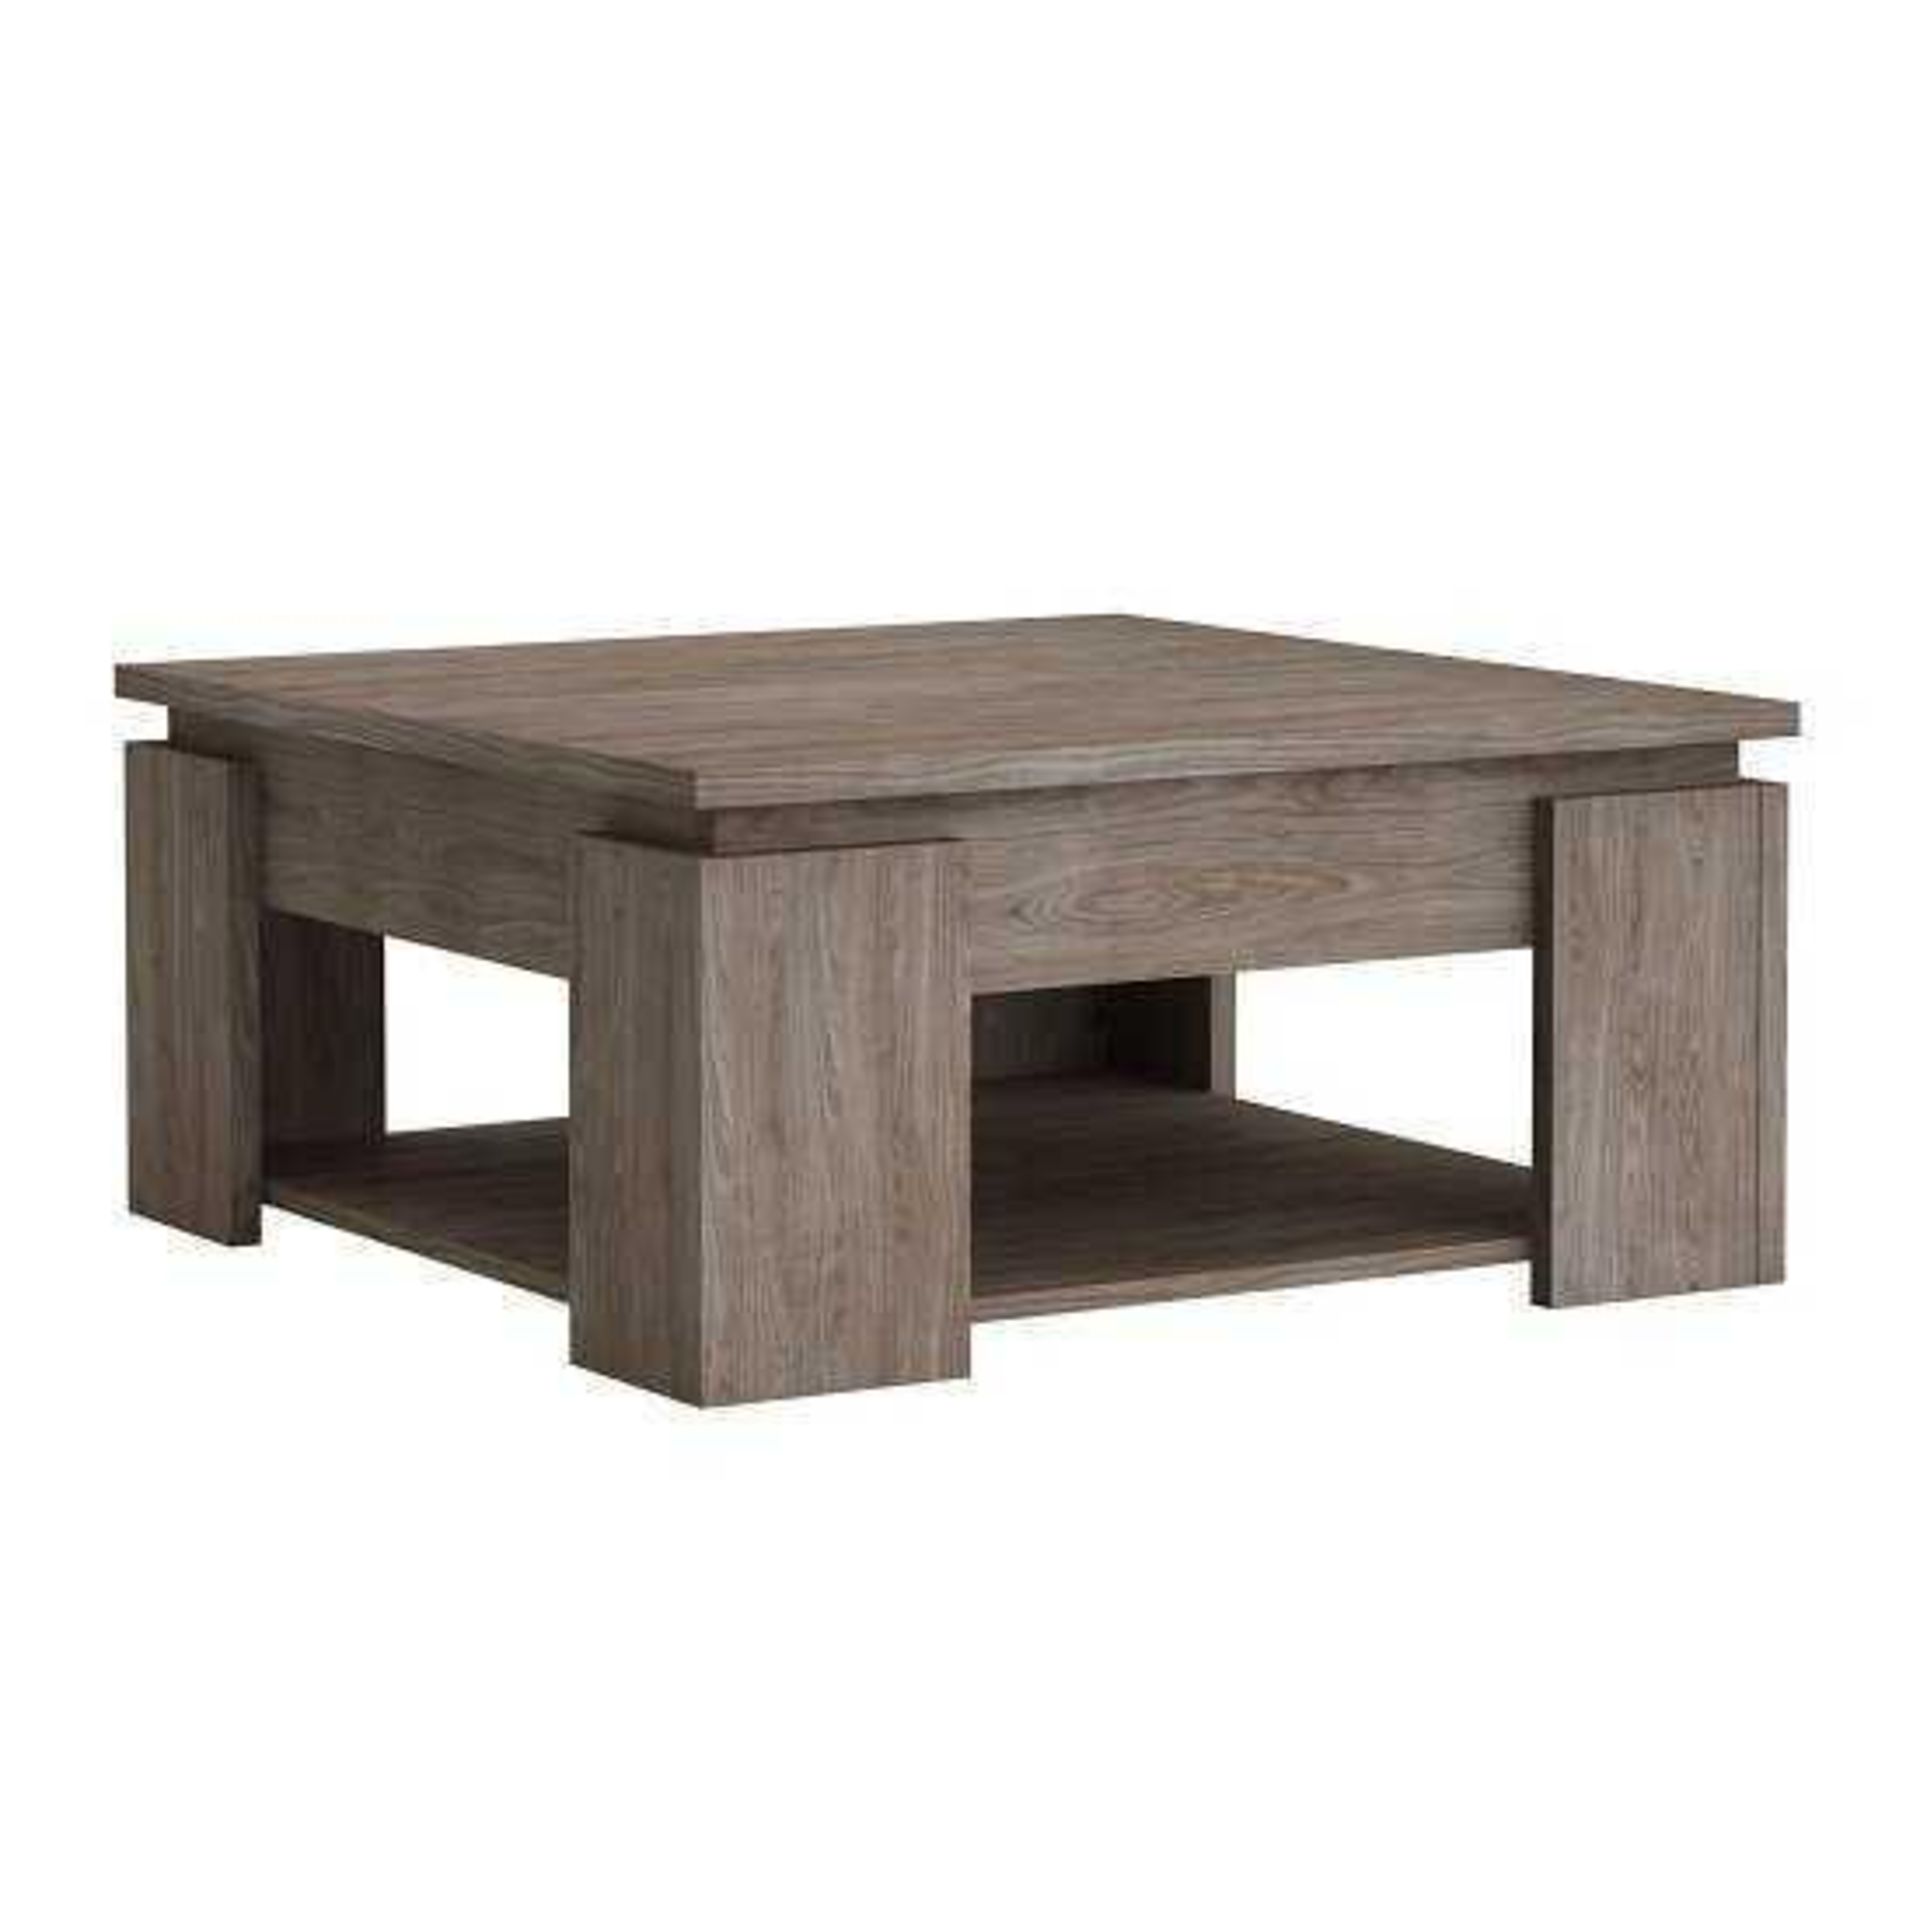 (Db) RRP £140 Lot To Contain One Boxed Linosa Wooden Coffee Table Square In Walnut With Undershelf.